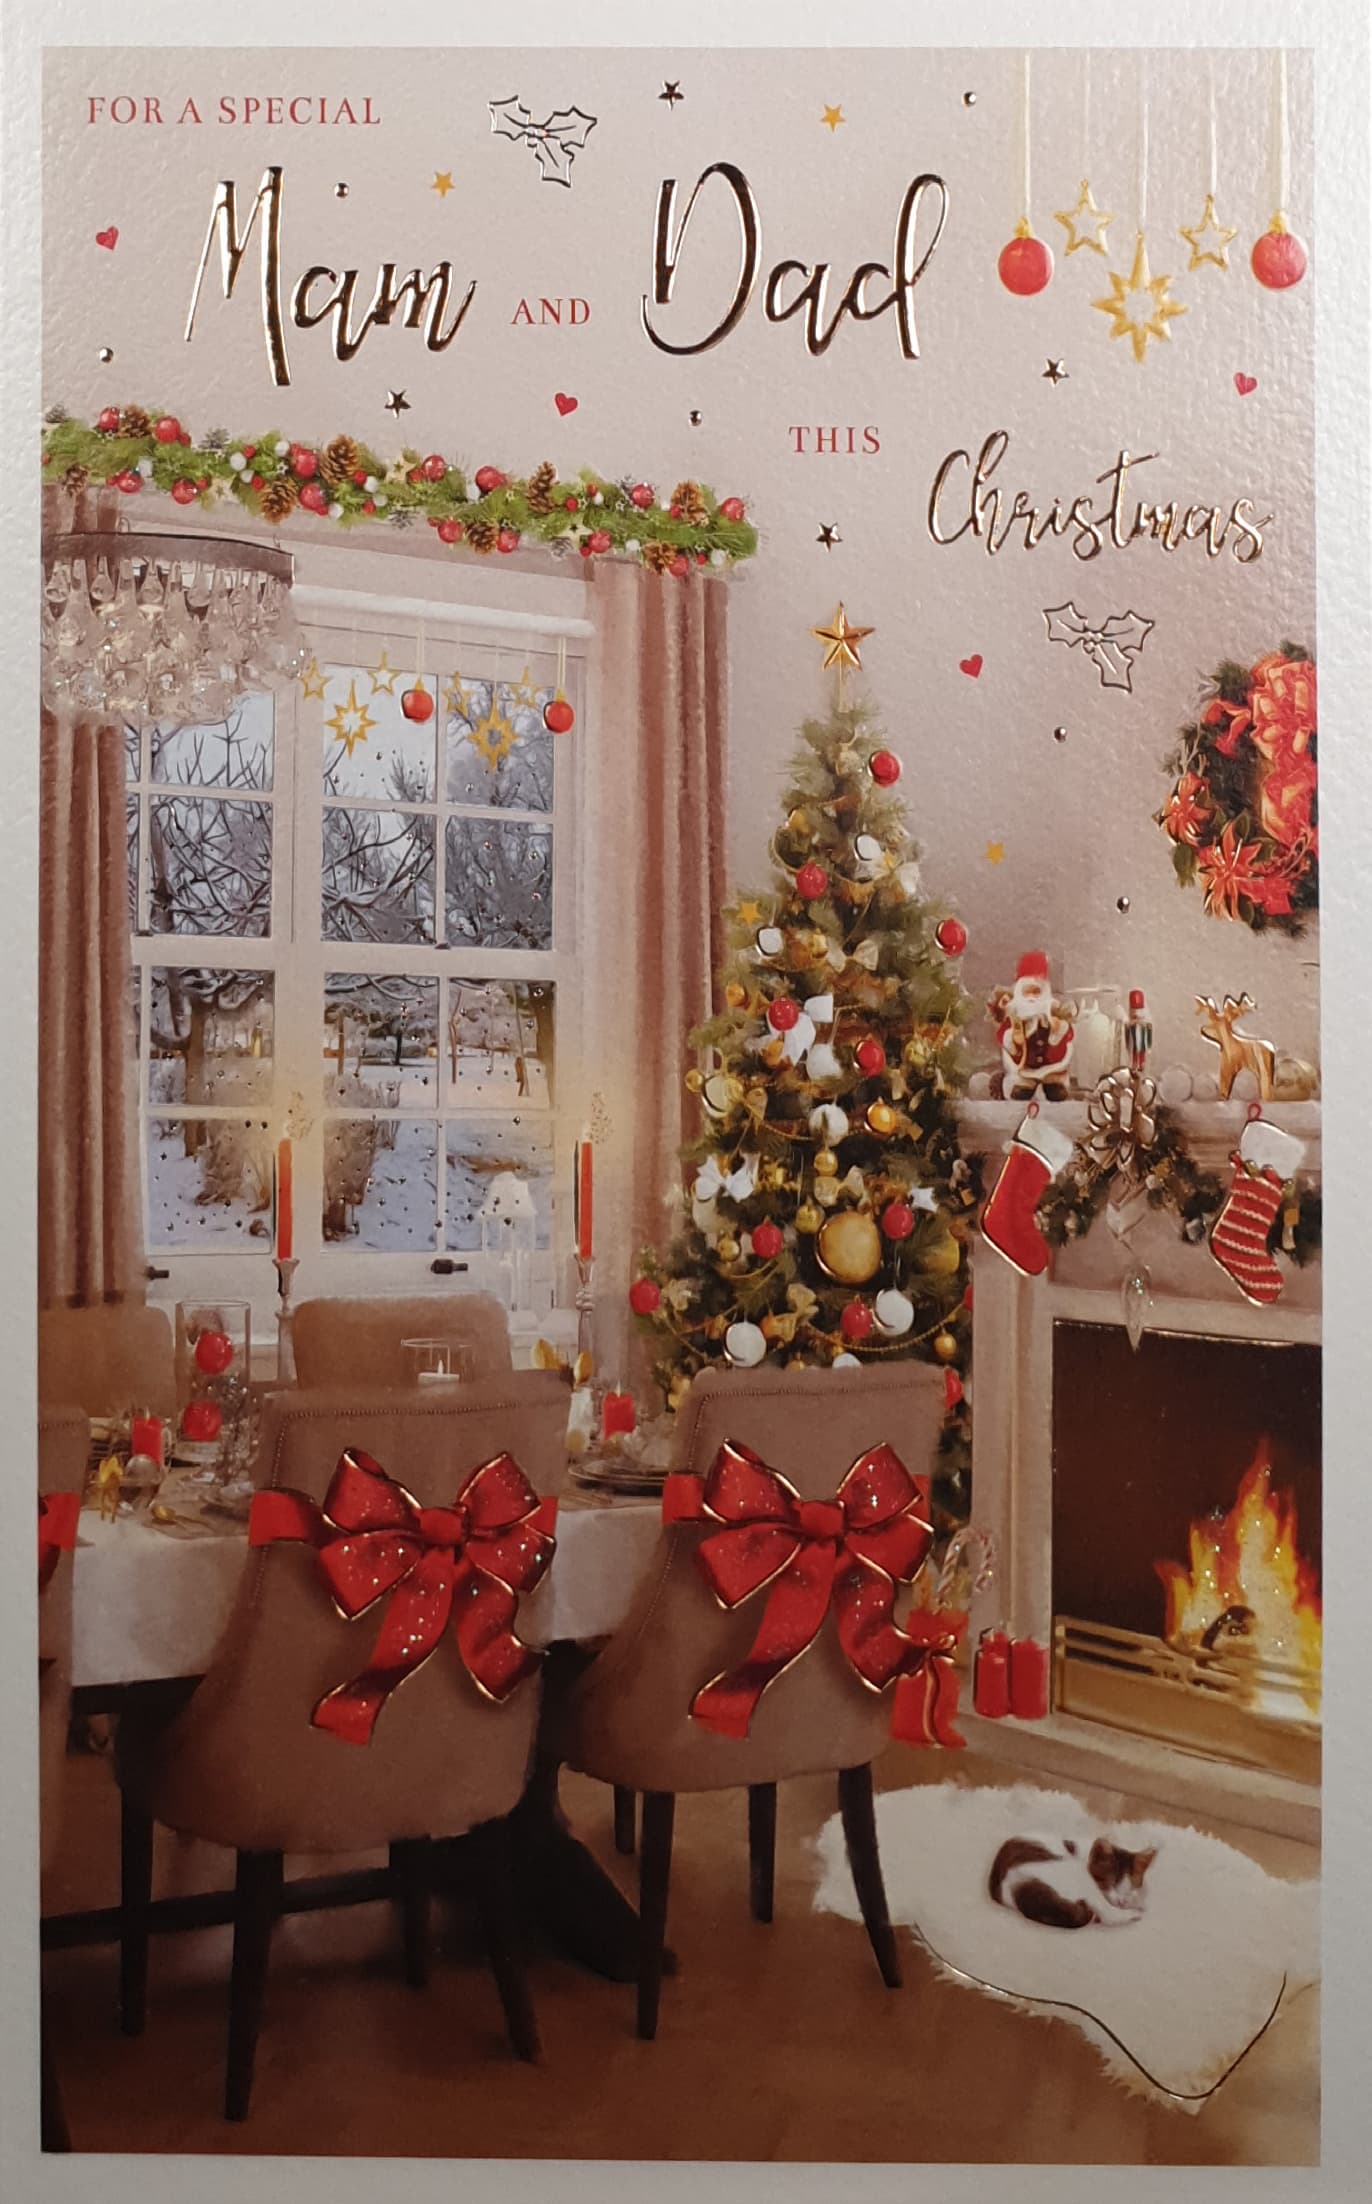 Mam and Dad Christmas Card - Red Ribbons on Dining Chairs by Fireplace